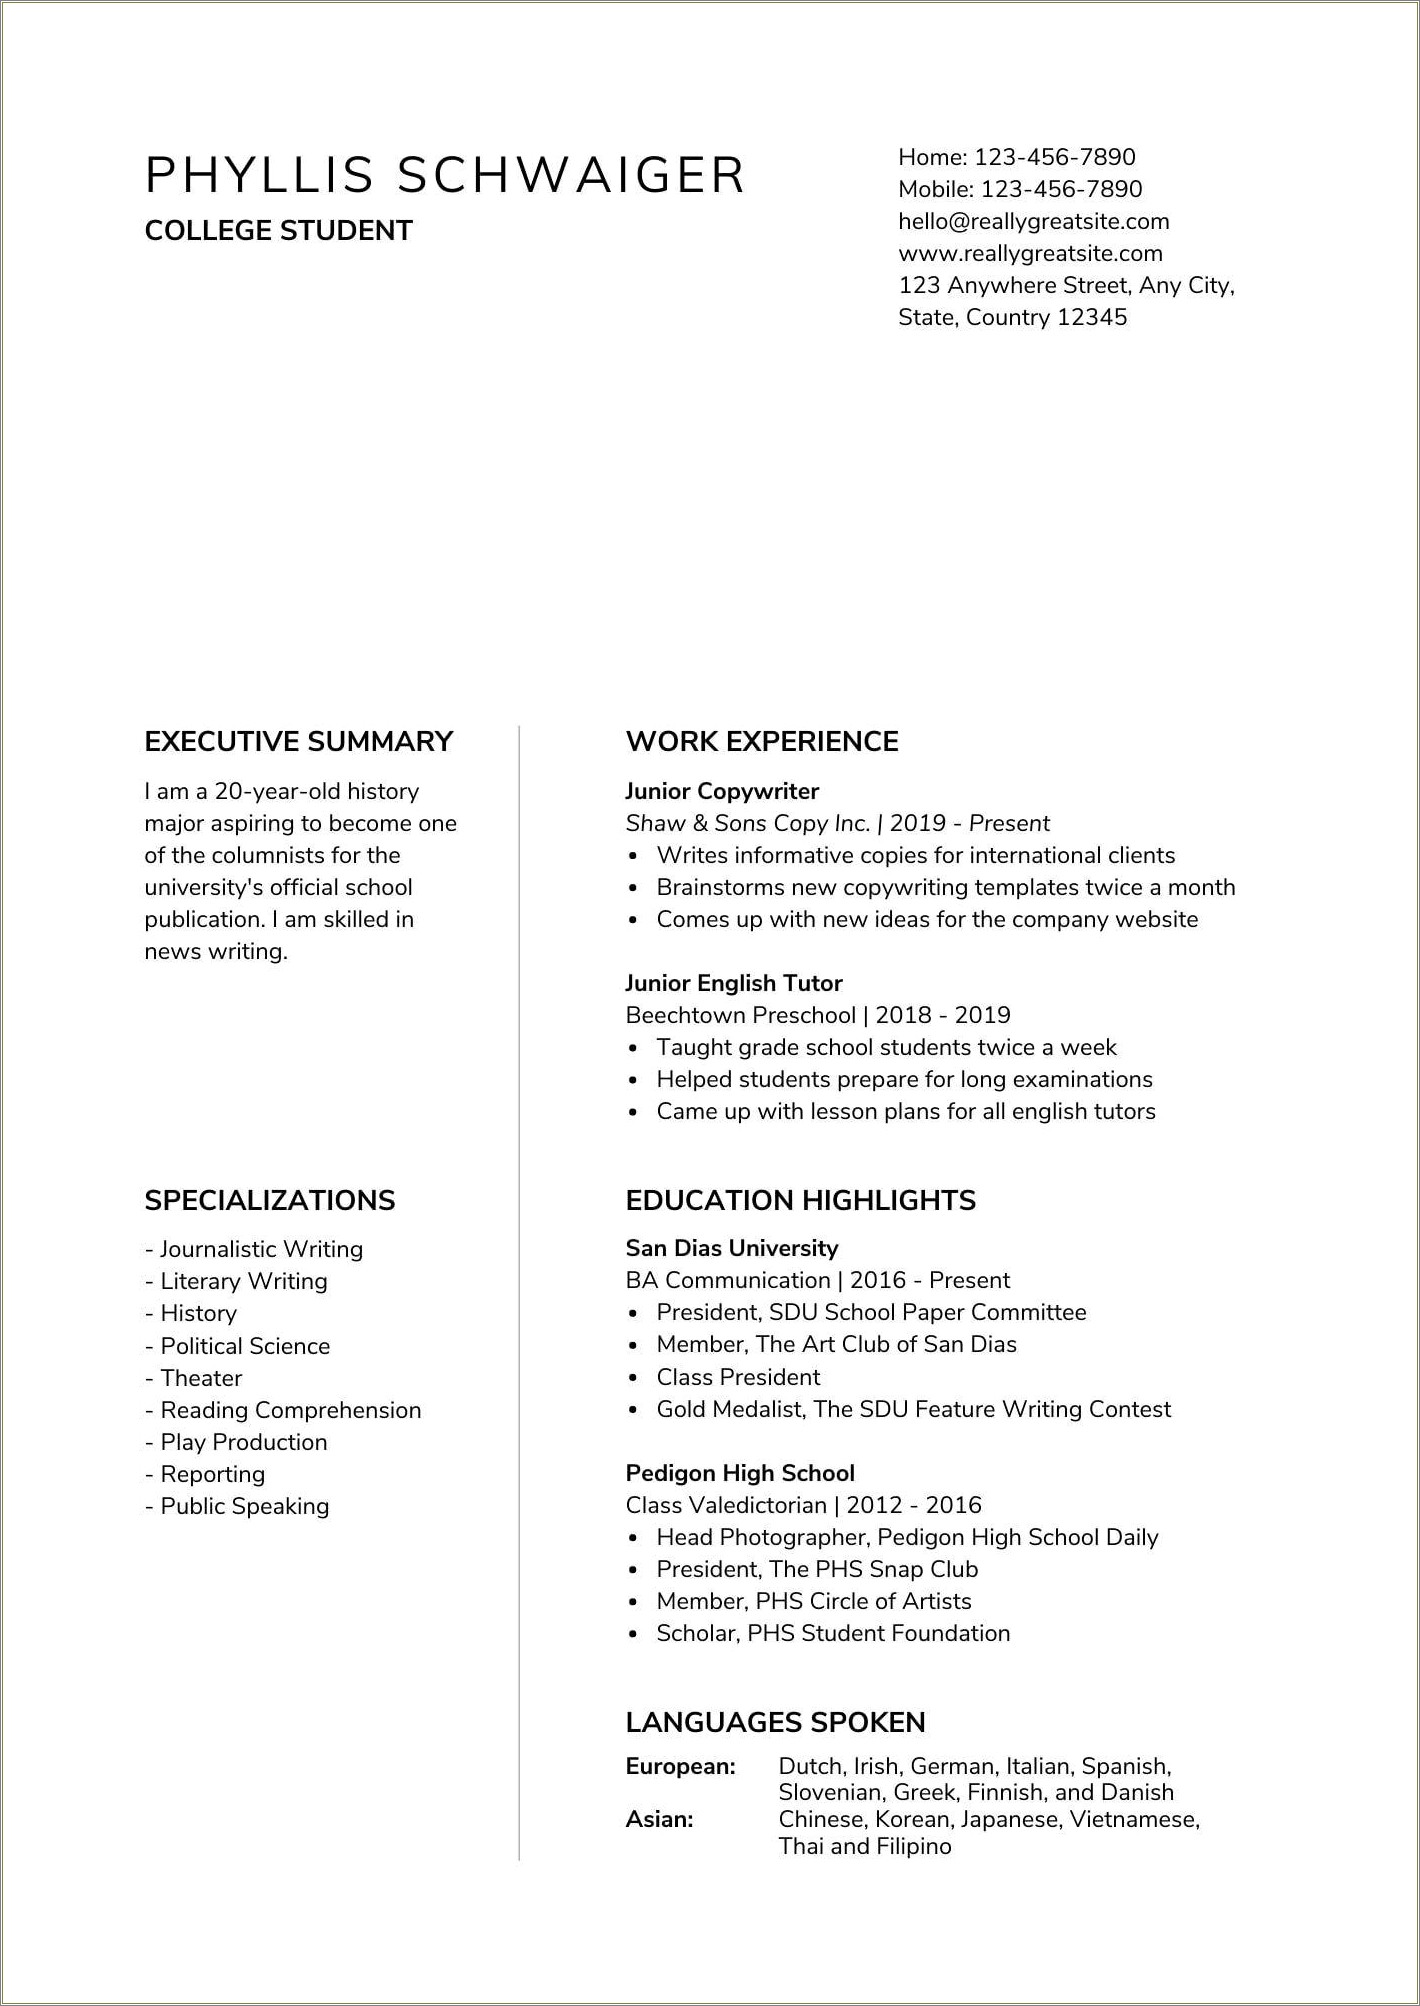 Resume Tips For Highschool Students With No Experience